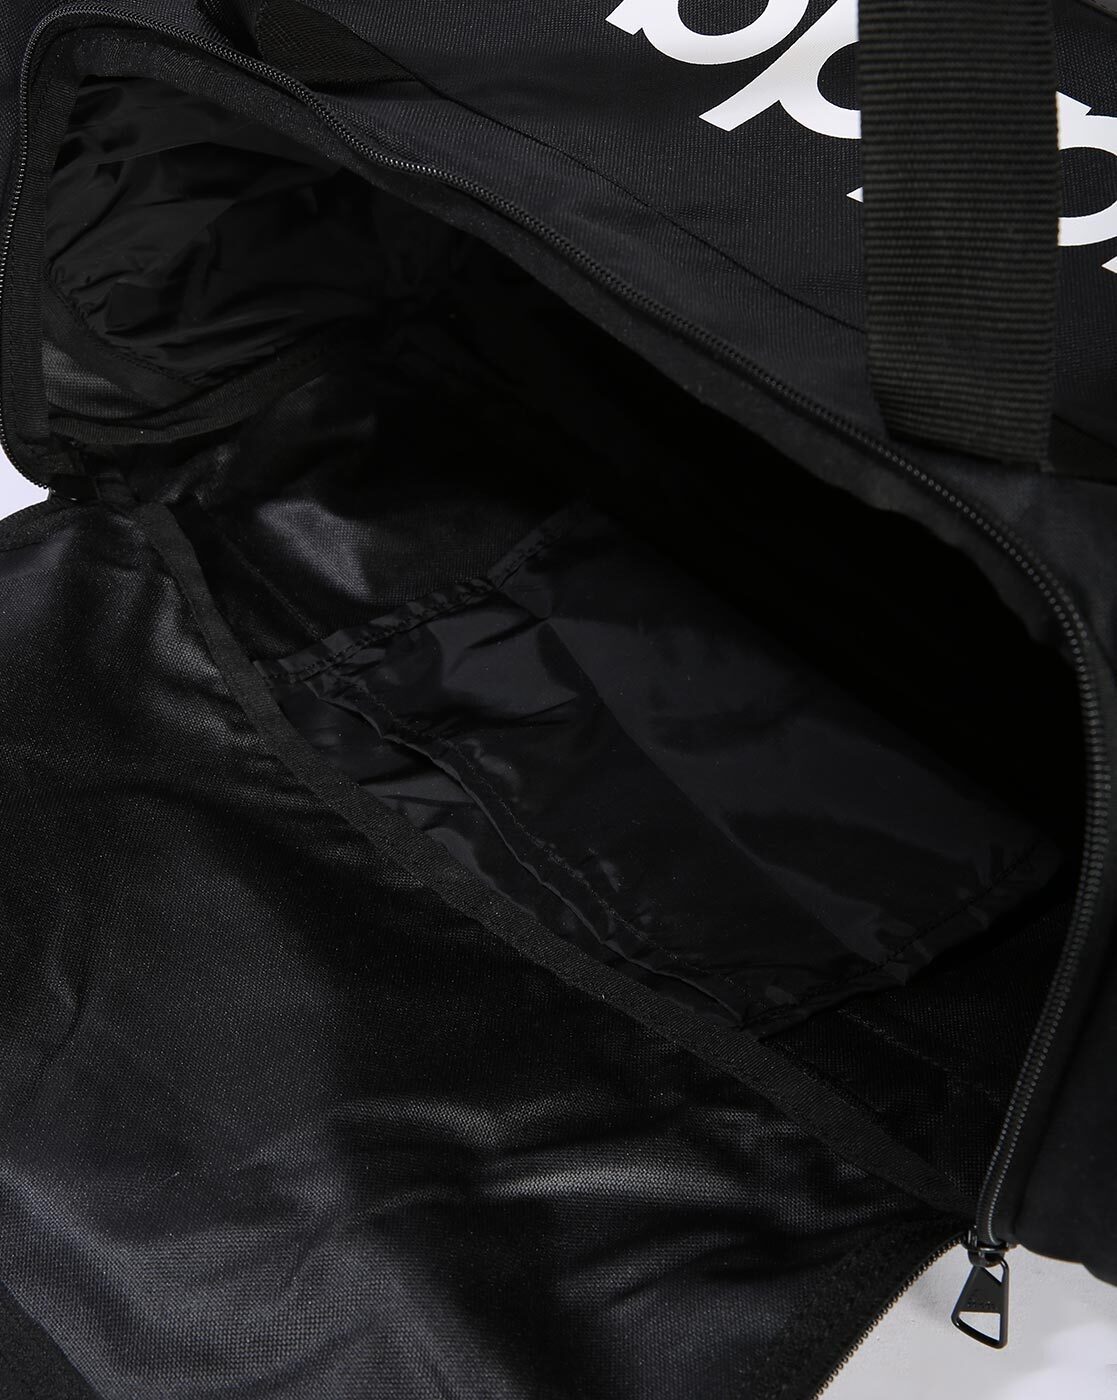 Buy Black Sports & Utility Bag for Men by ADIDAS Online